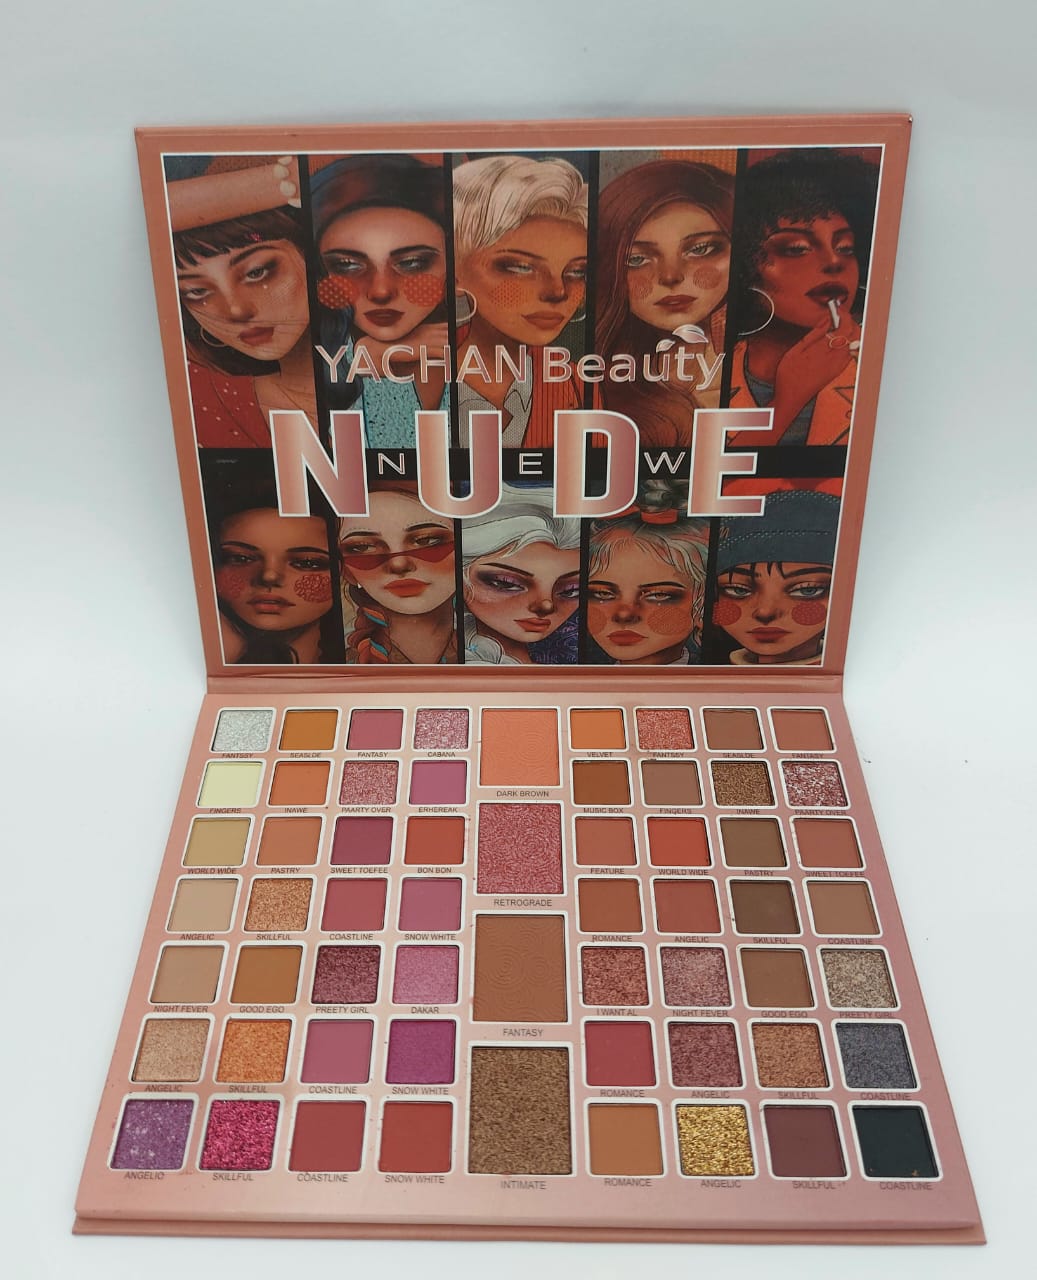 Yachan Beauty 60 Colors Nude Eyeshadow,Blusher And Highlight Palette